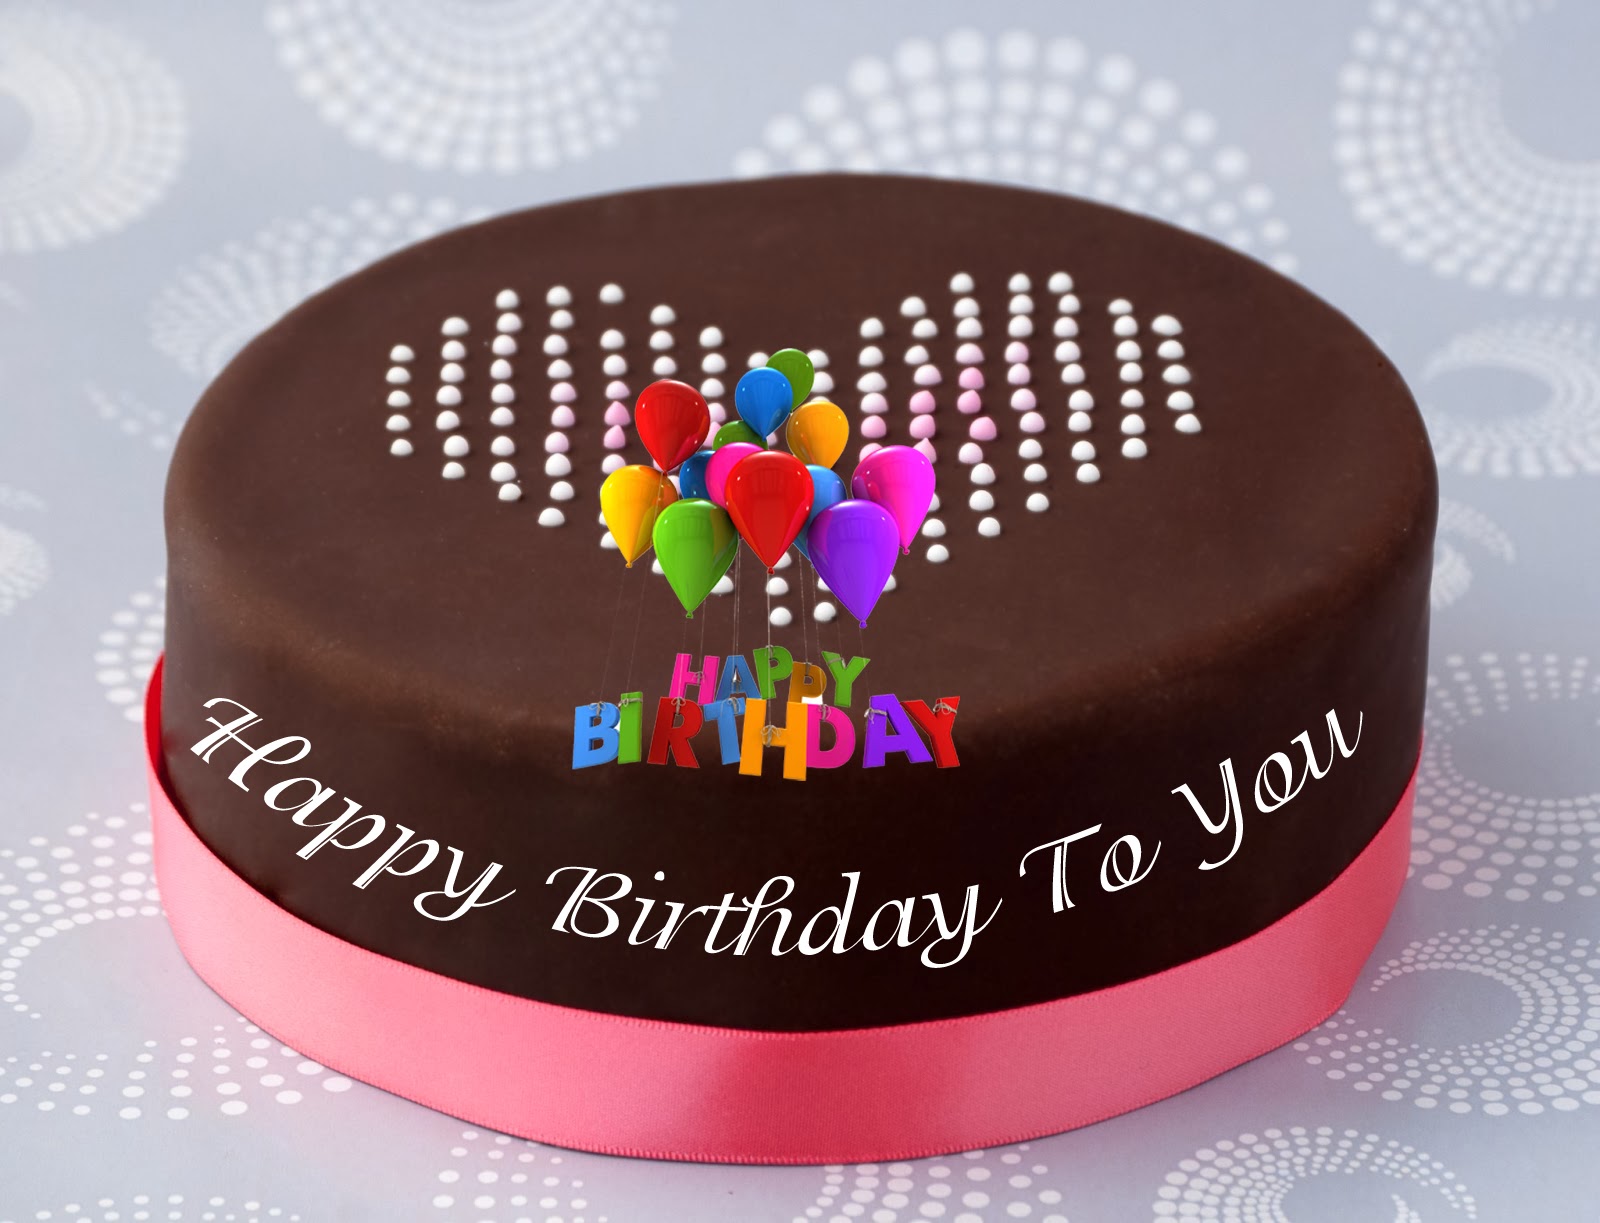 Lovable Images: Happy Birthday Greetings free download ...